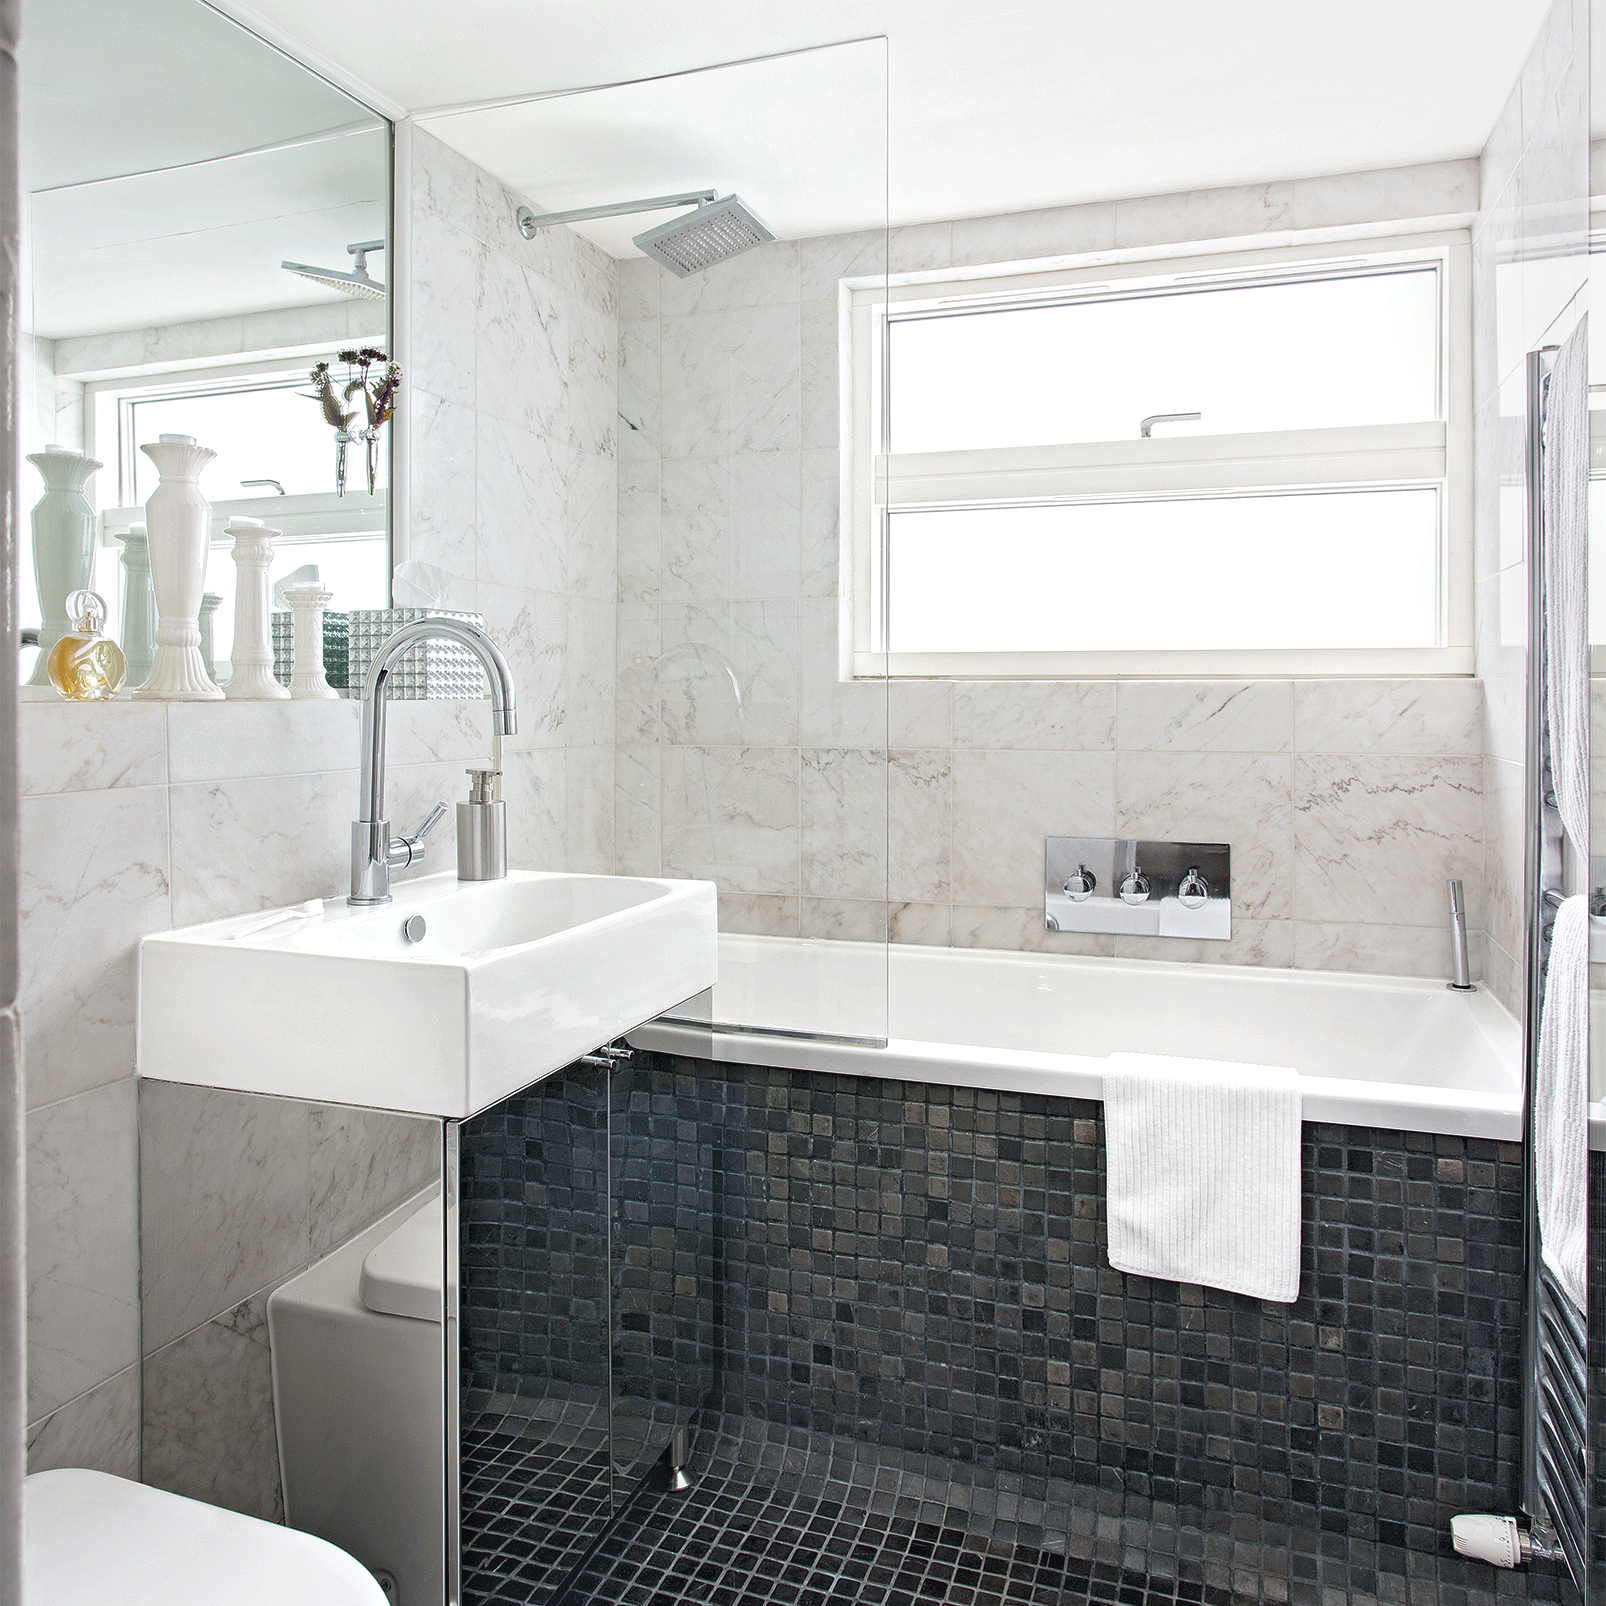 bathroom with marble wall tiles and sleek black mosaic tiles on the floor and side of the bath